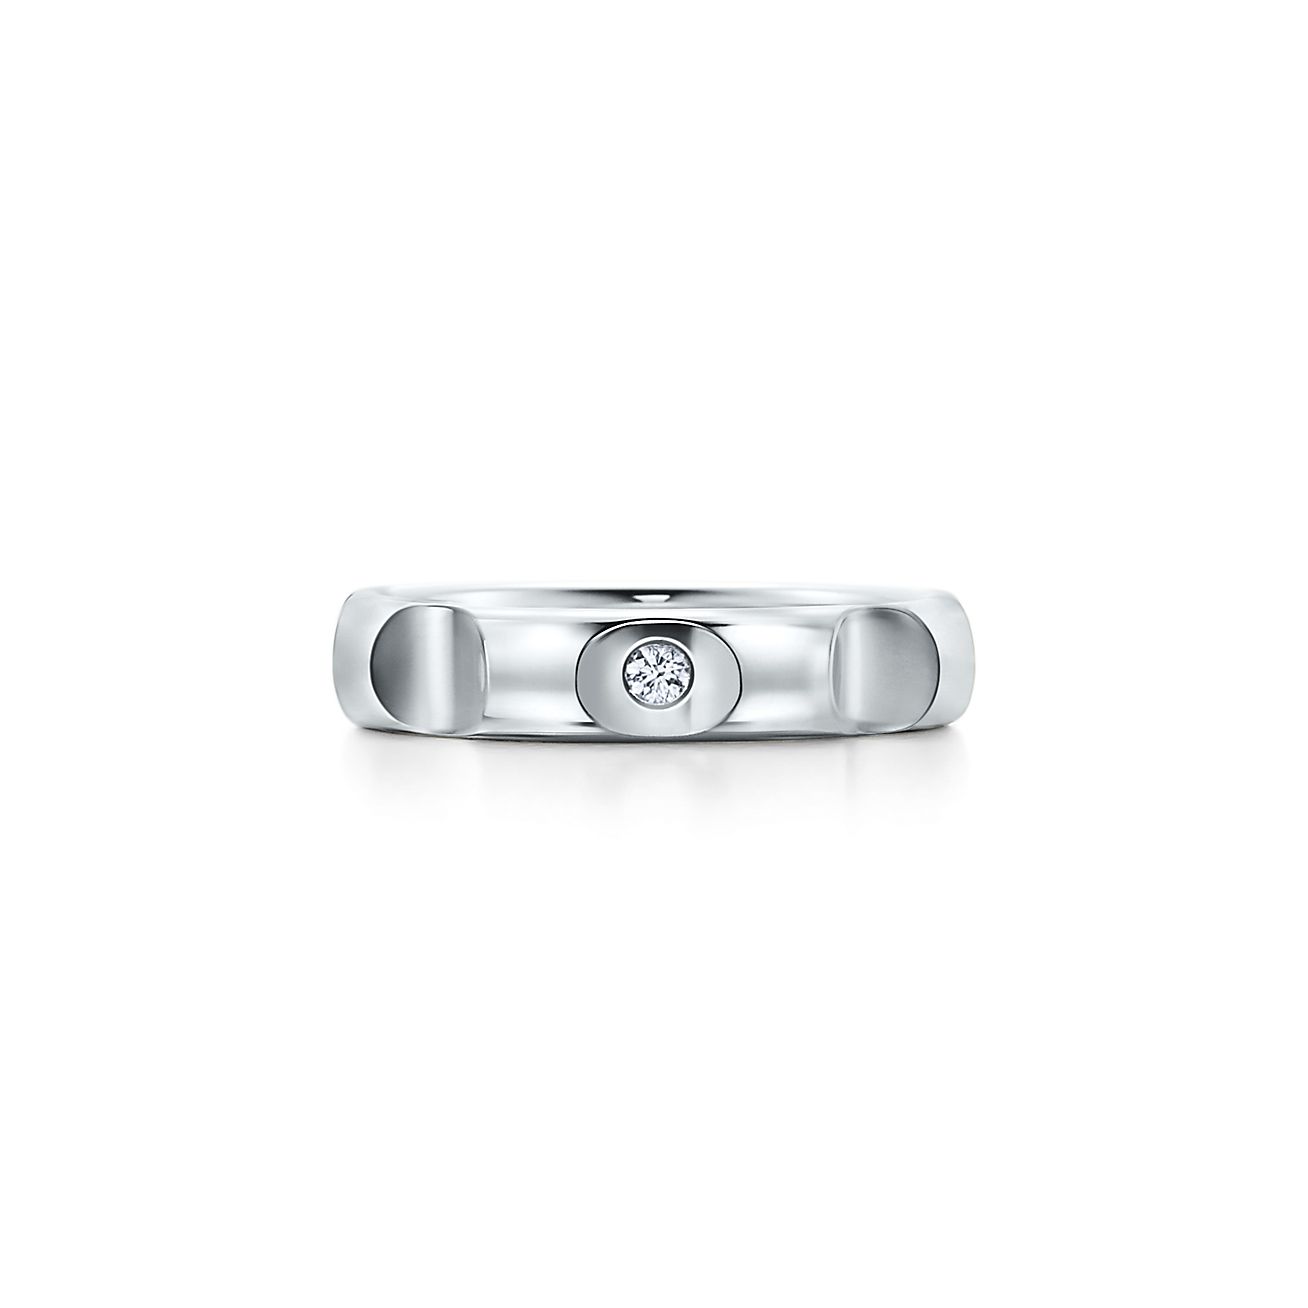 Groove™ ring in sterling silver 